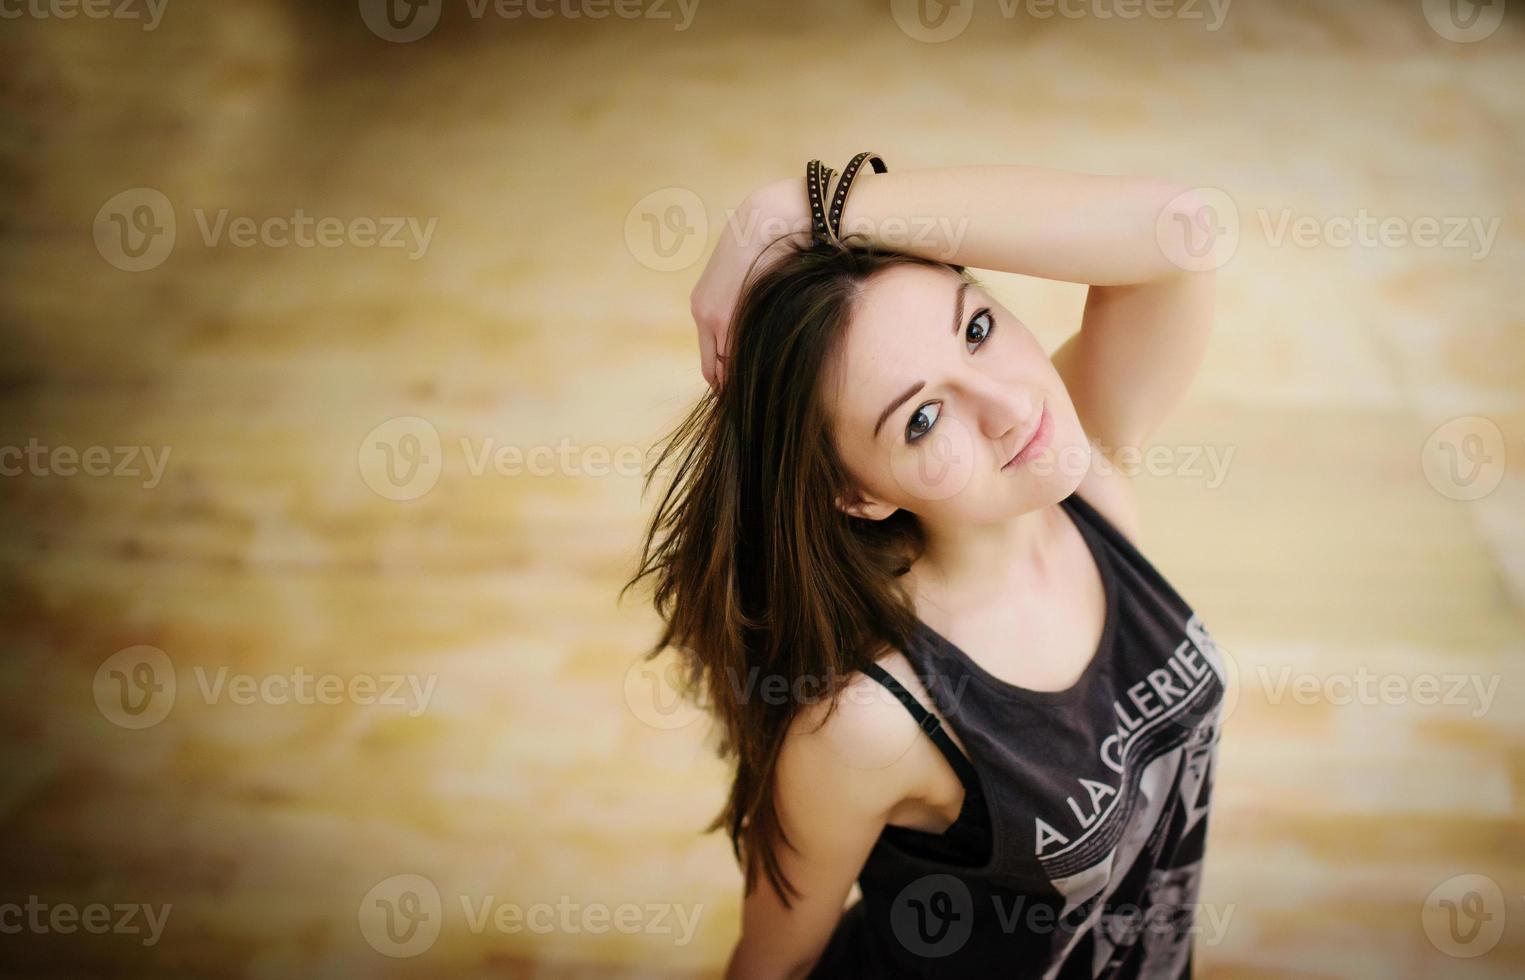 Street dancer girl wearing casual clothes on footless background wooden parquet indoor. photo